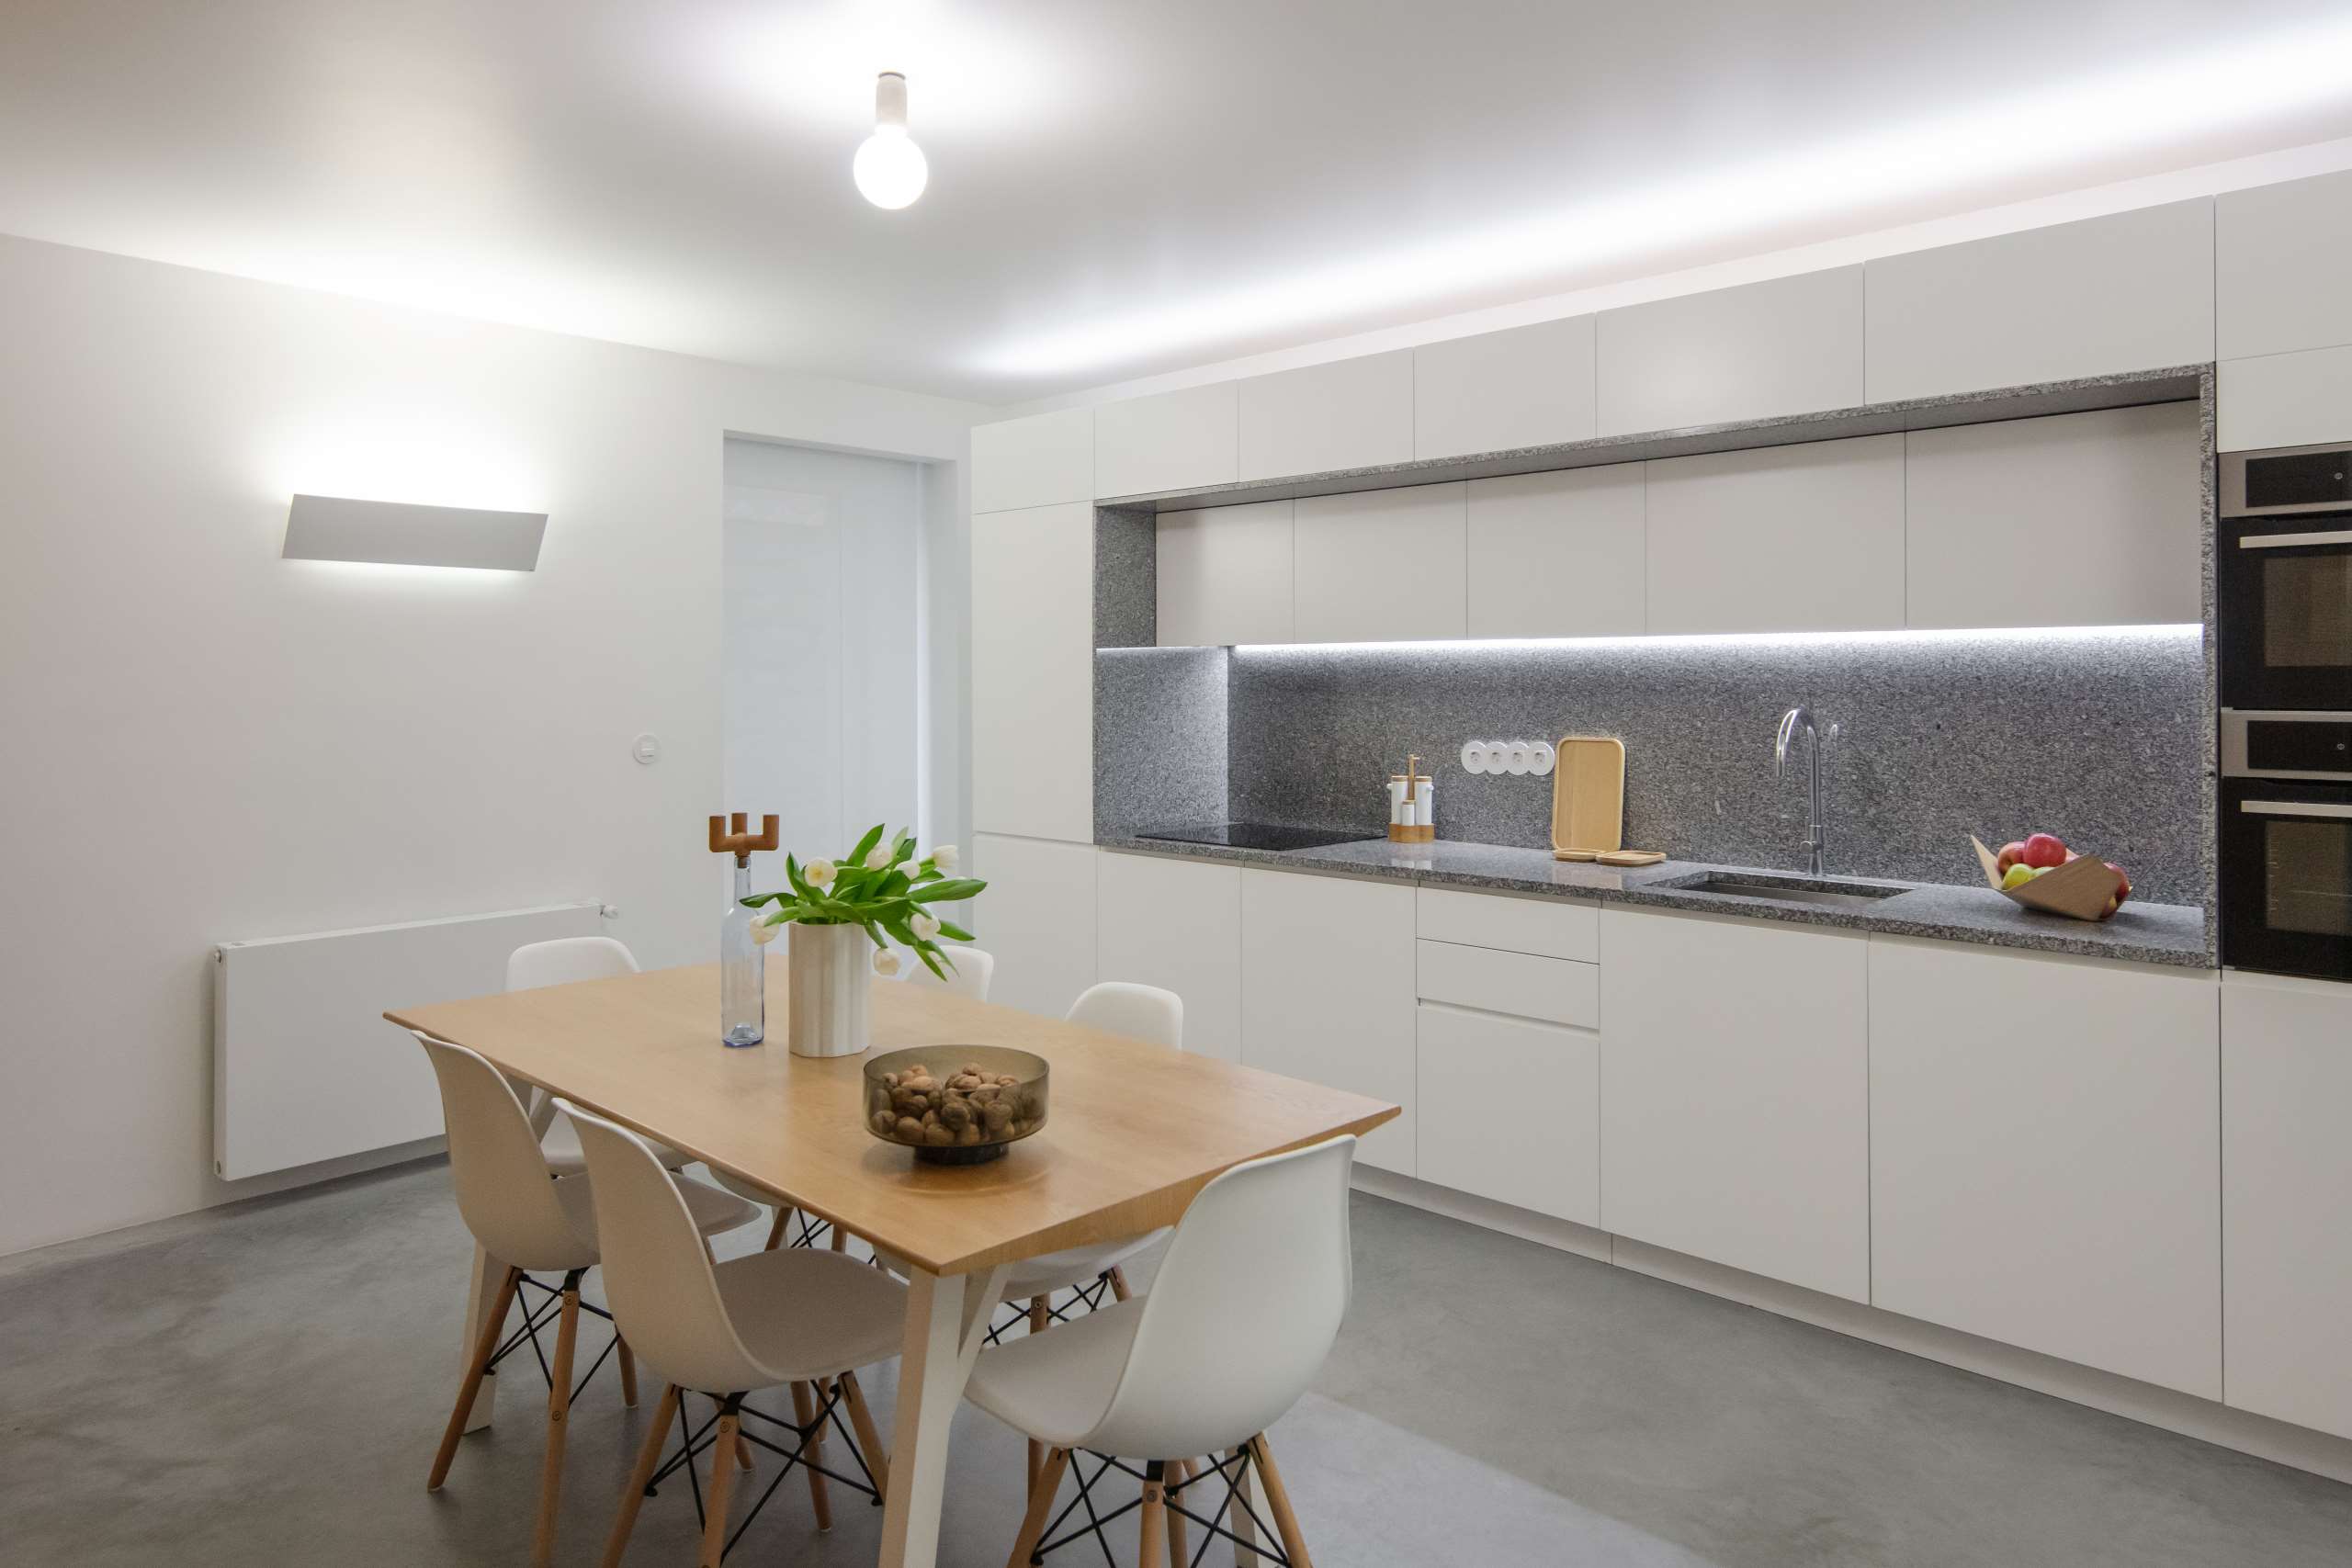 The kitchen is minimal, with a stylish dining set, sleek white cabinets and built in lights